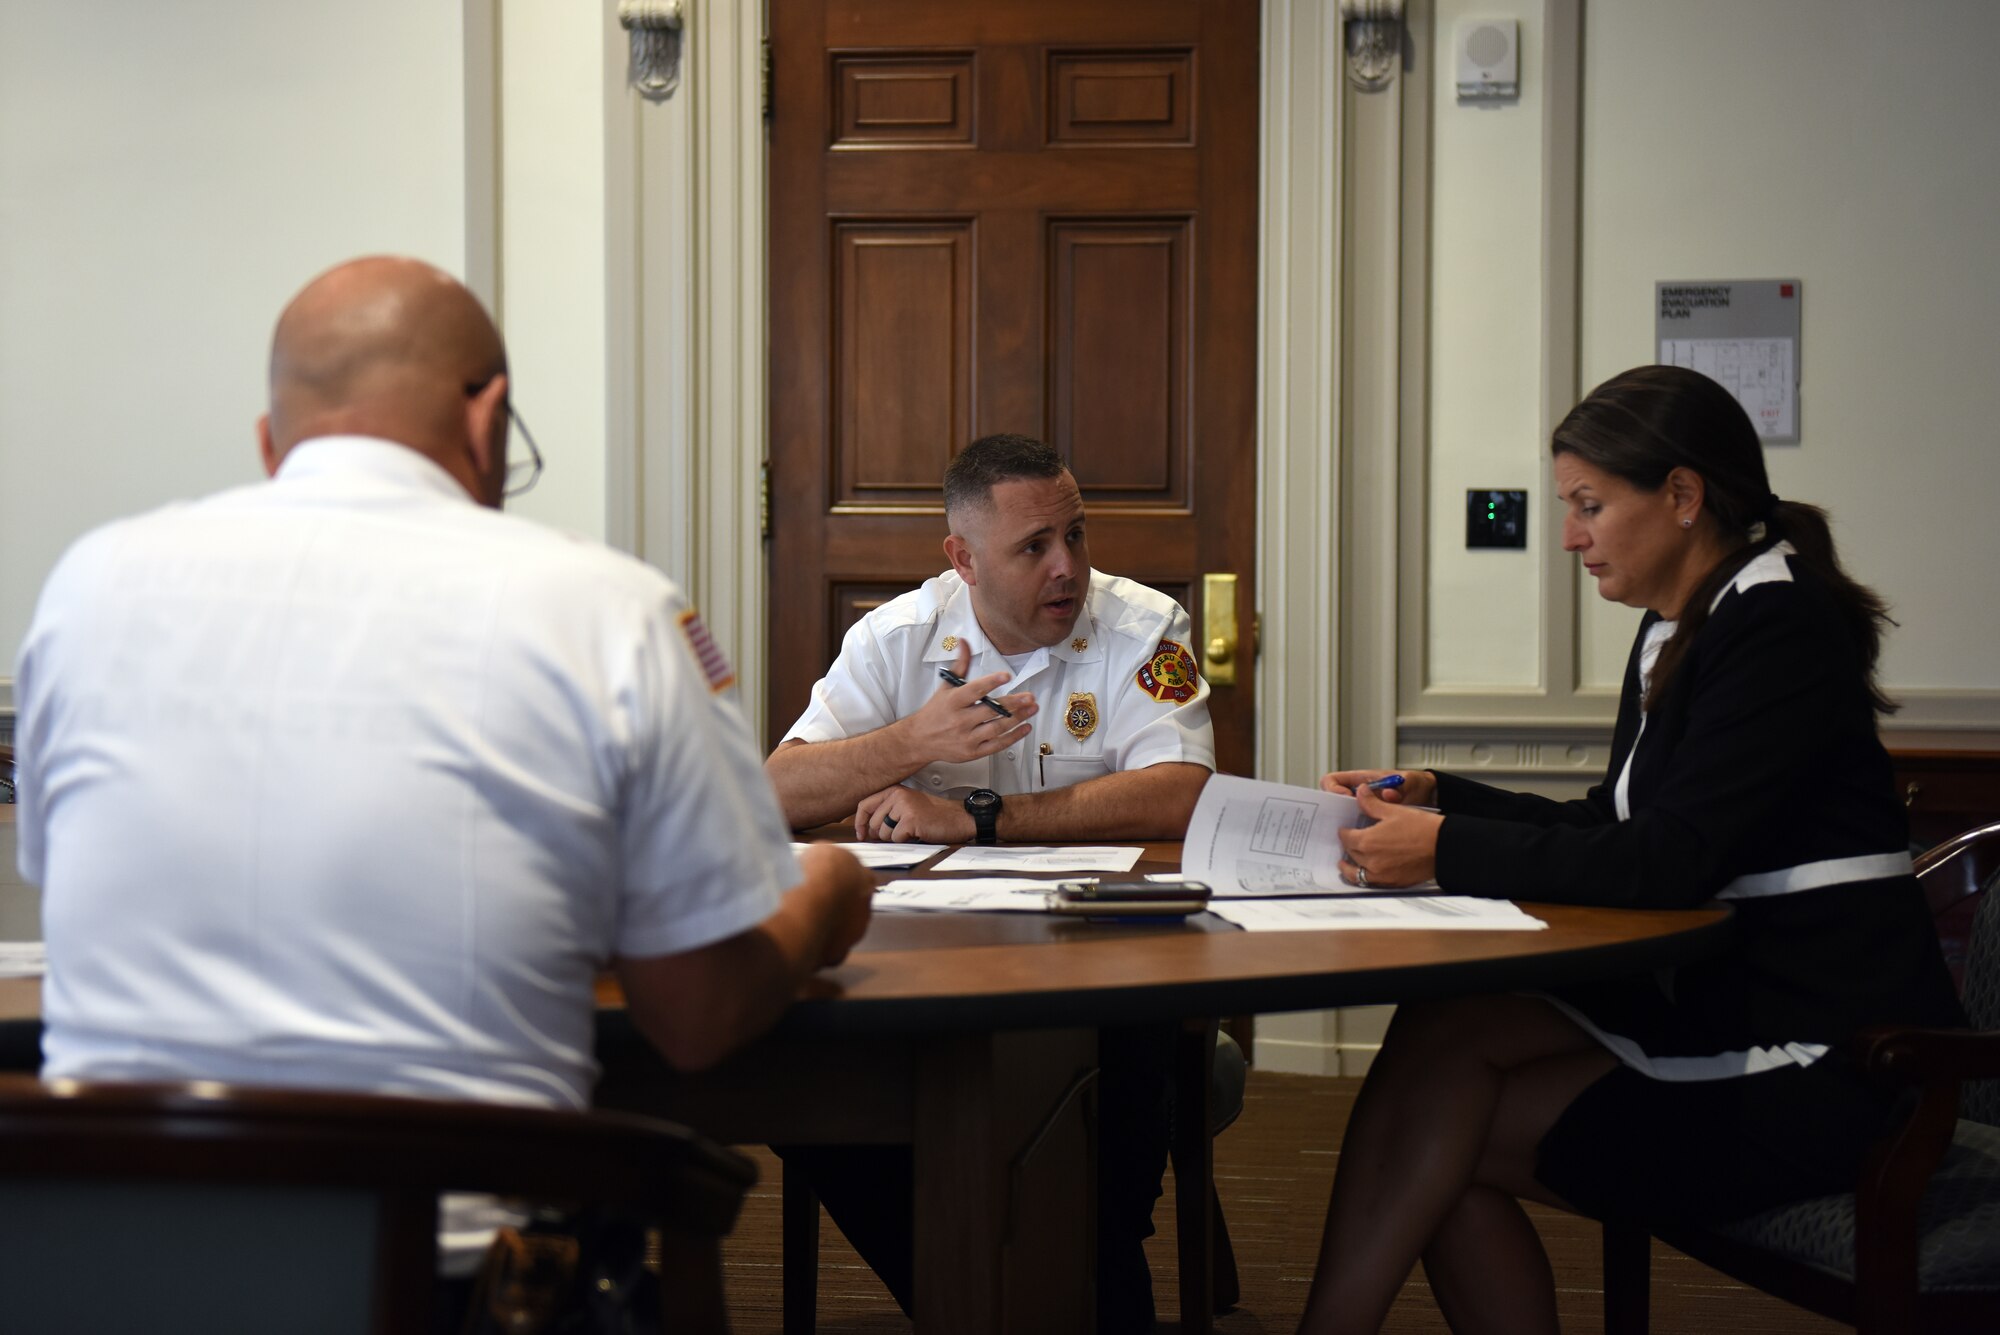 Scott Little, center, fire chief of Lancaster’s Bureau of Fire, and David Amico, deputy chief of Lancaster’s Bureau of Fire, meet with Lancaster’s Mayor Danene Sorace to discuss the possible addition and remodeling of firehouses as well as improving their fire rescue service delivery Aug. 21, 2018, Lancaster, Pennsylvania. The meeting resulted in Sorace approving a budget of up to 10 million dollars for this specific project. (U.S. Air National Guard photo by Senior Airman Julia Sorber/Released)